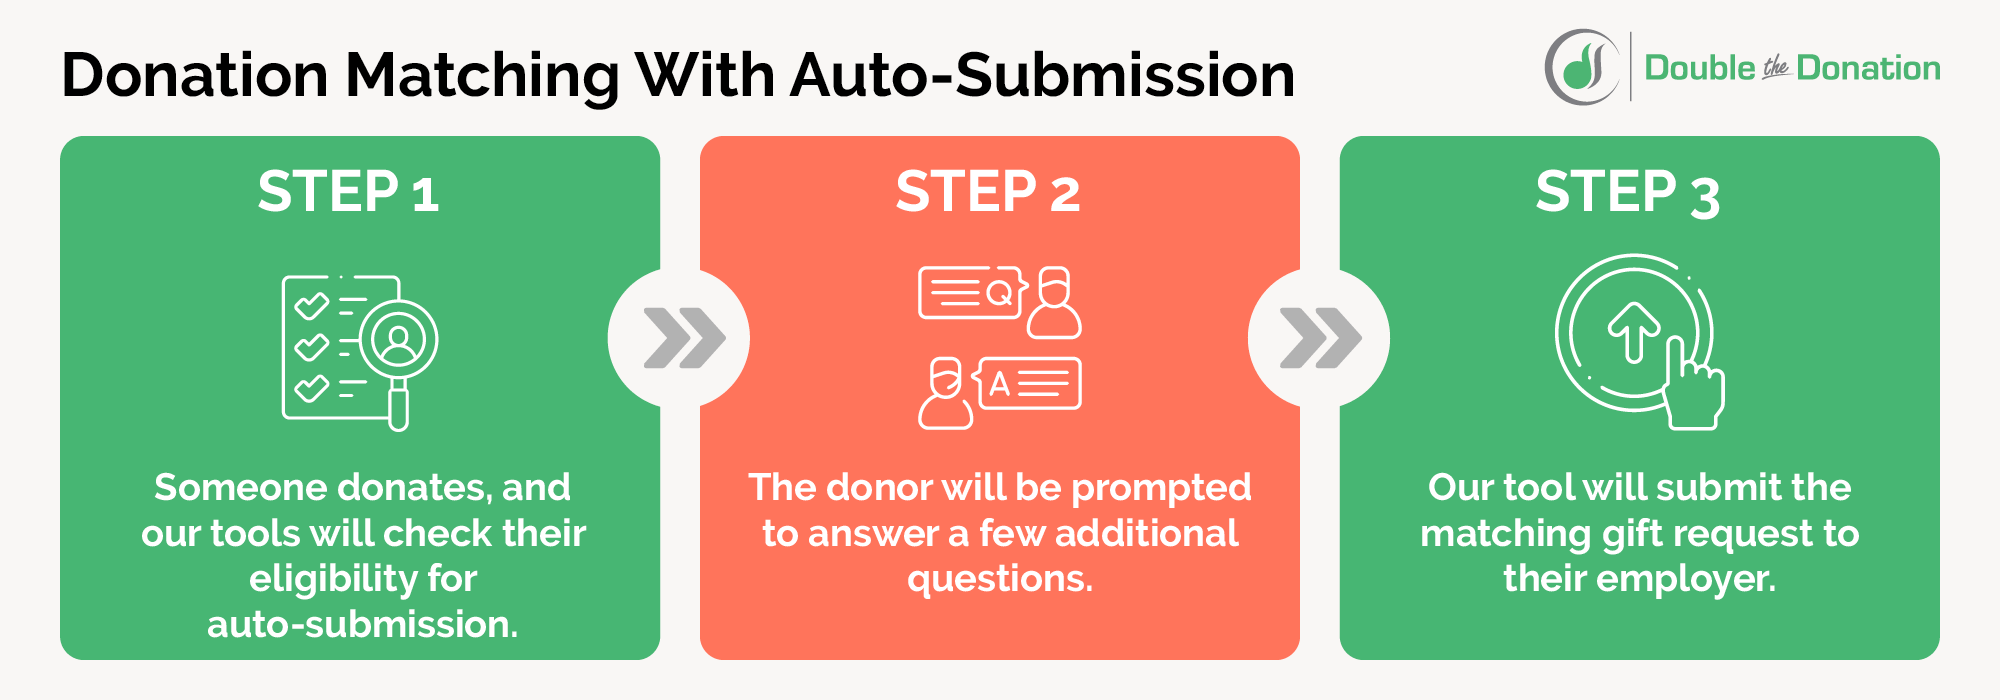 This graphic breaks down the donation matching process when using auto-submission tools.